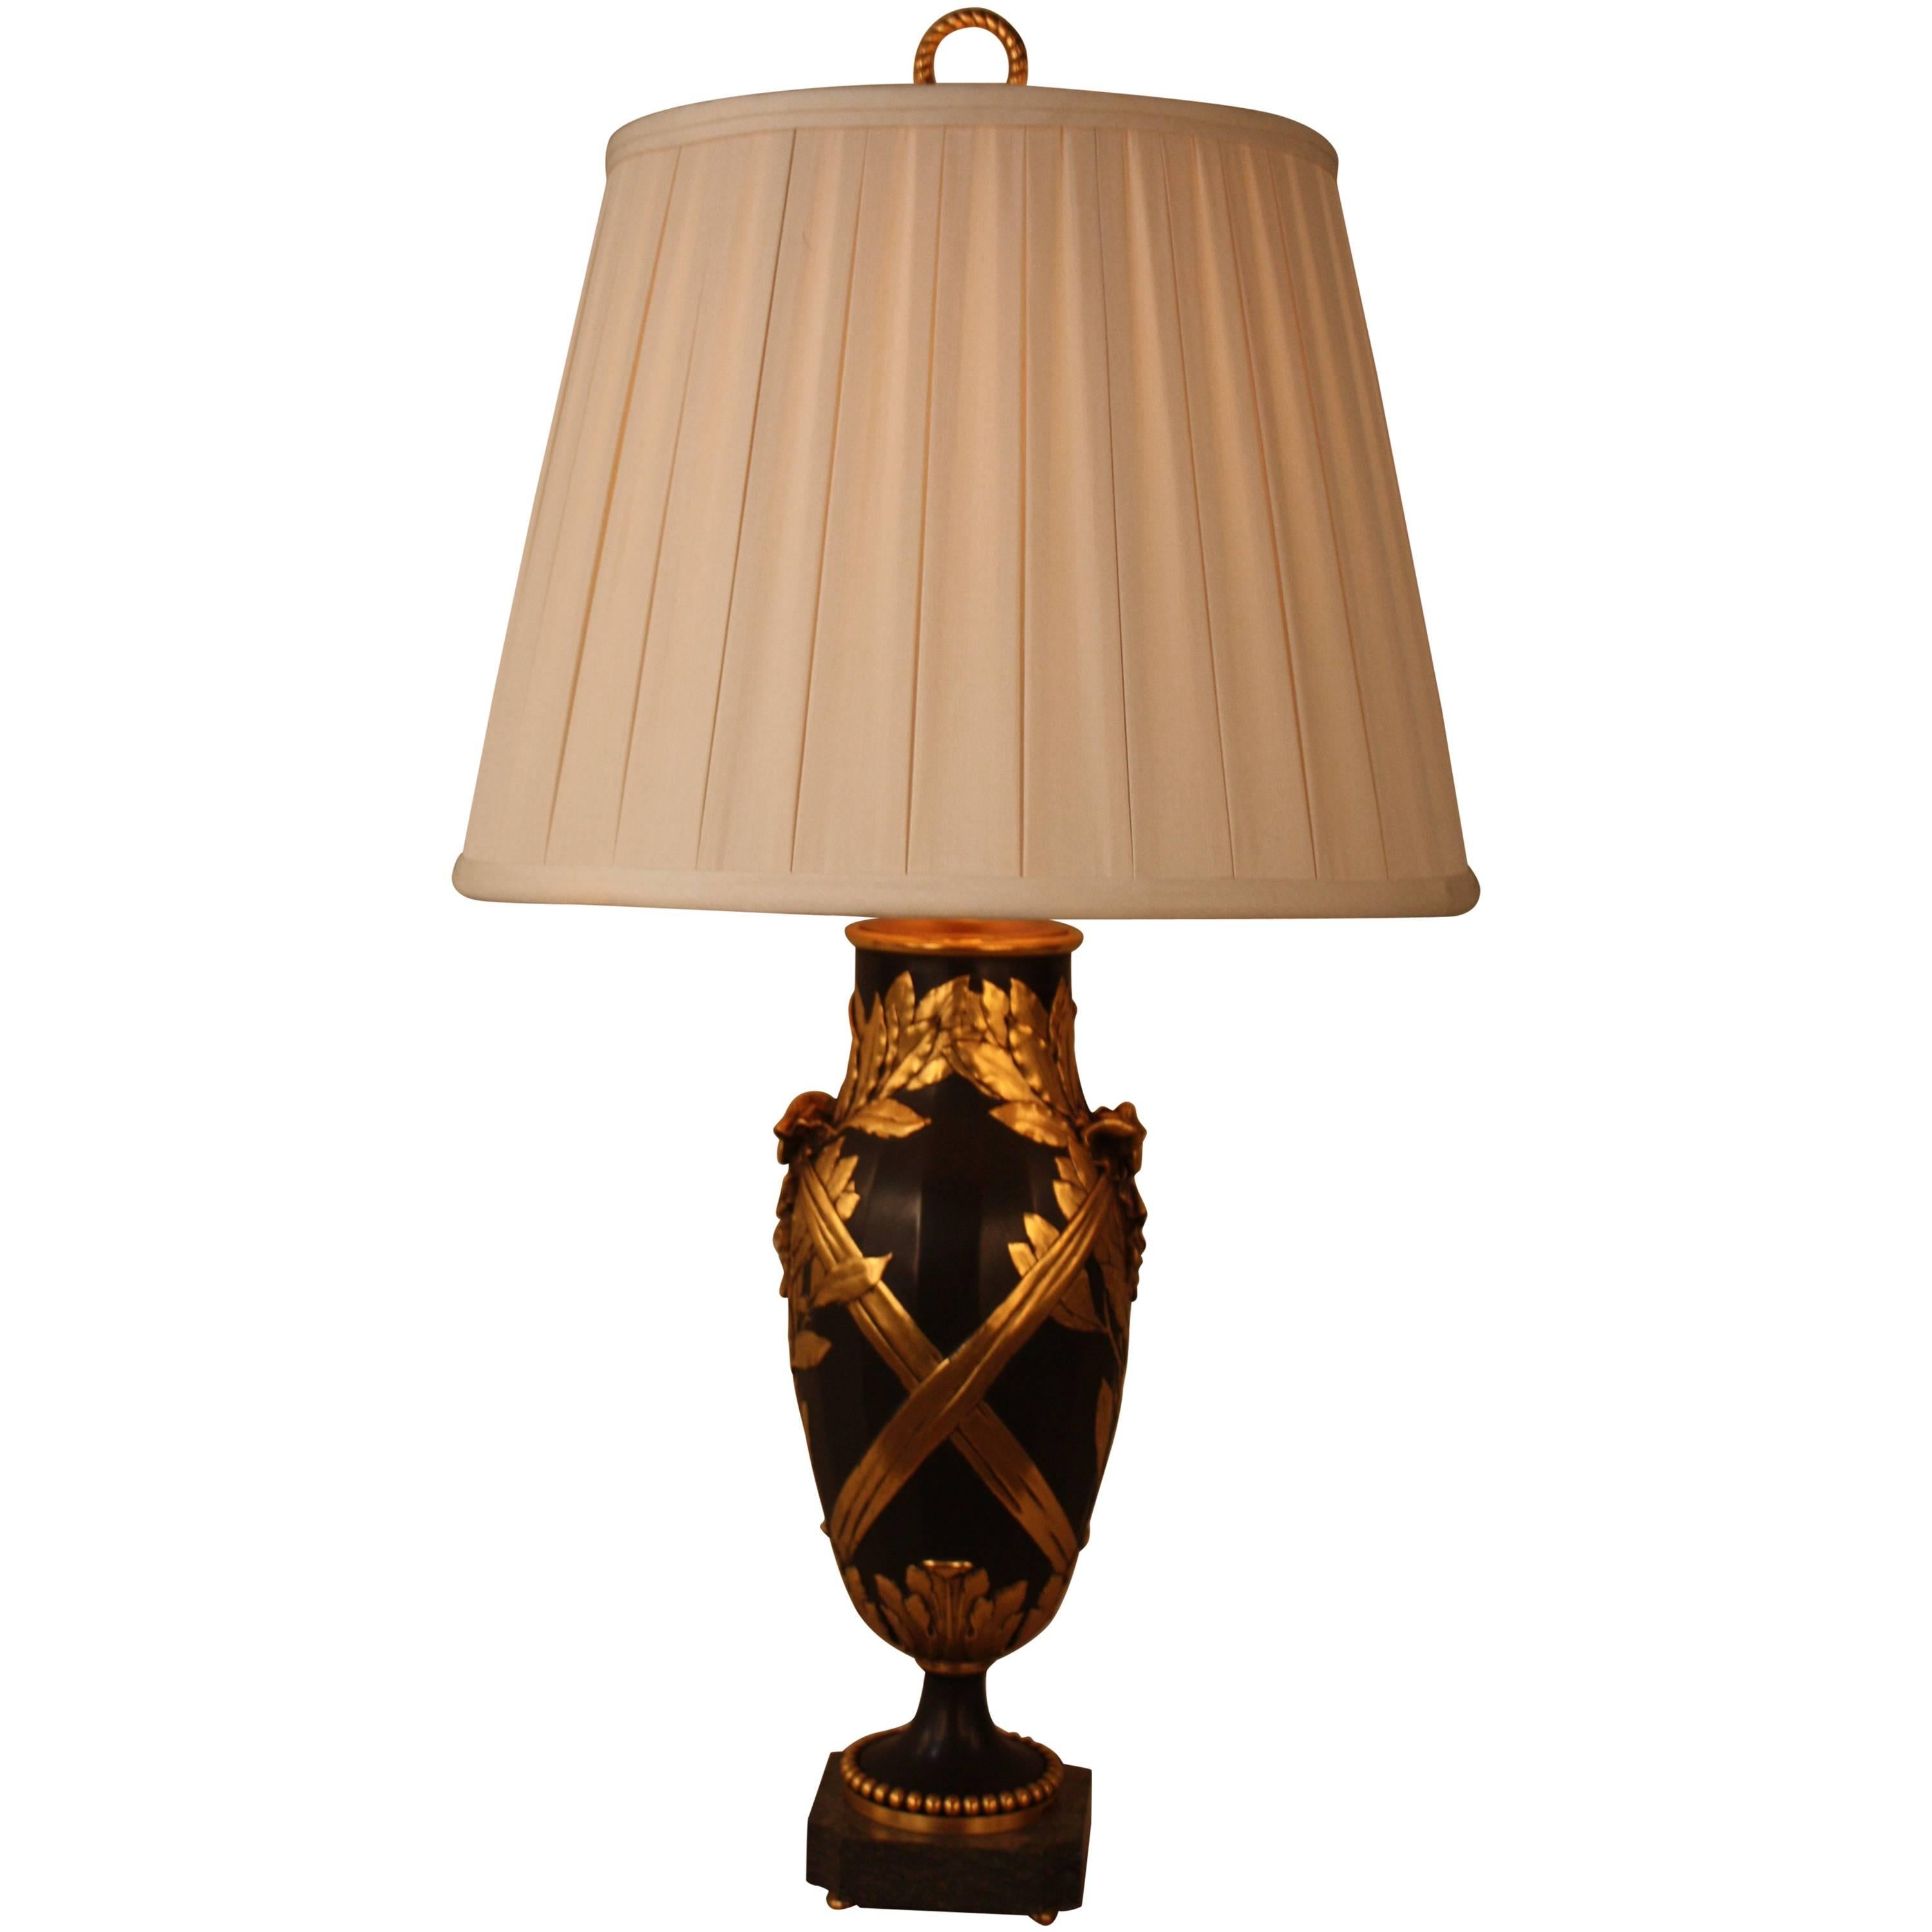 French Ormolu and Patinated Bronze Table Lamp by Christofle